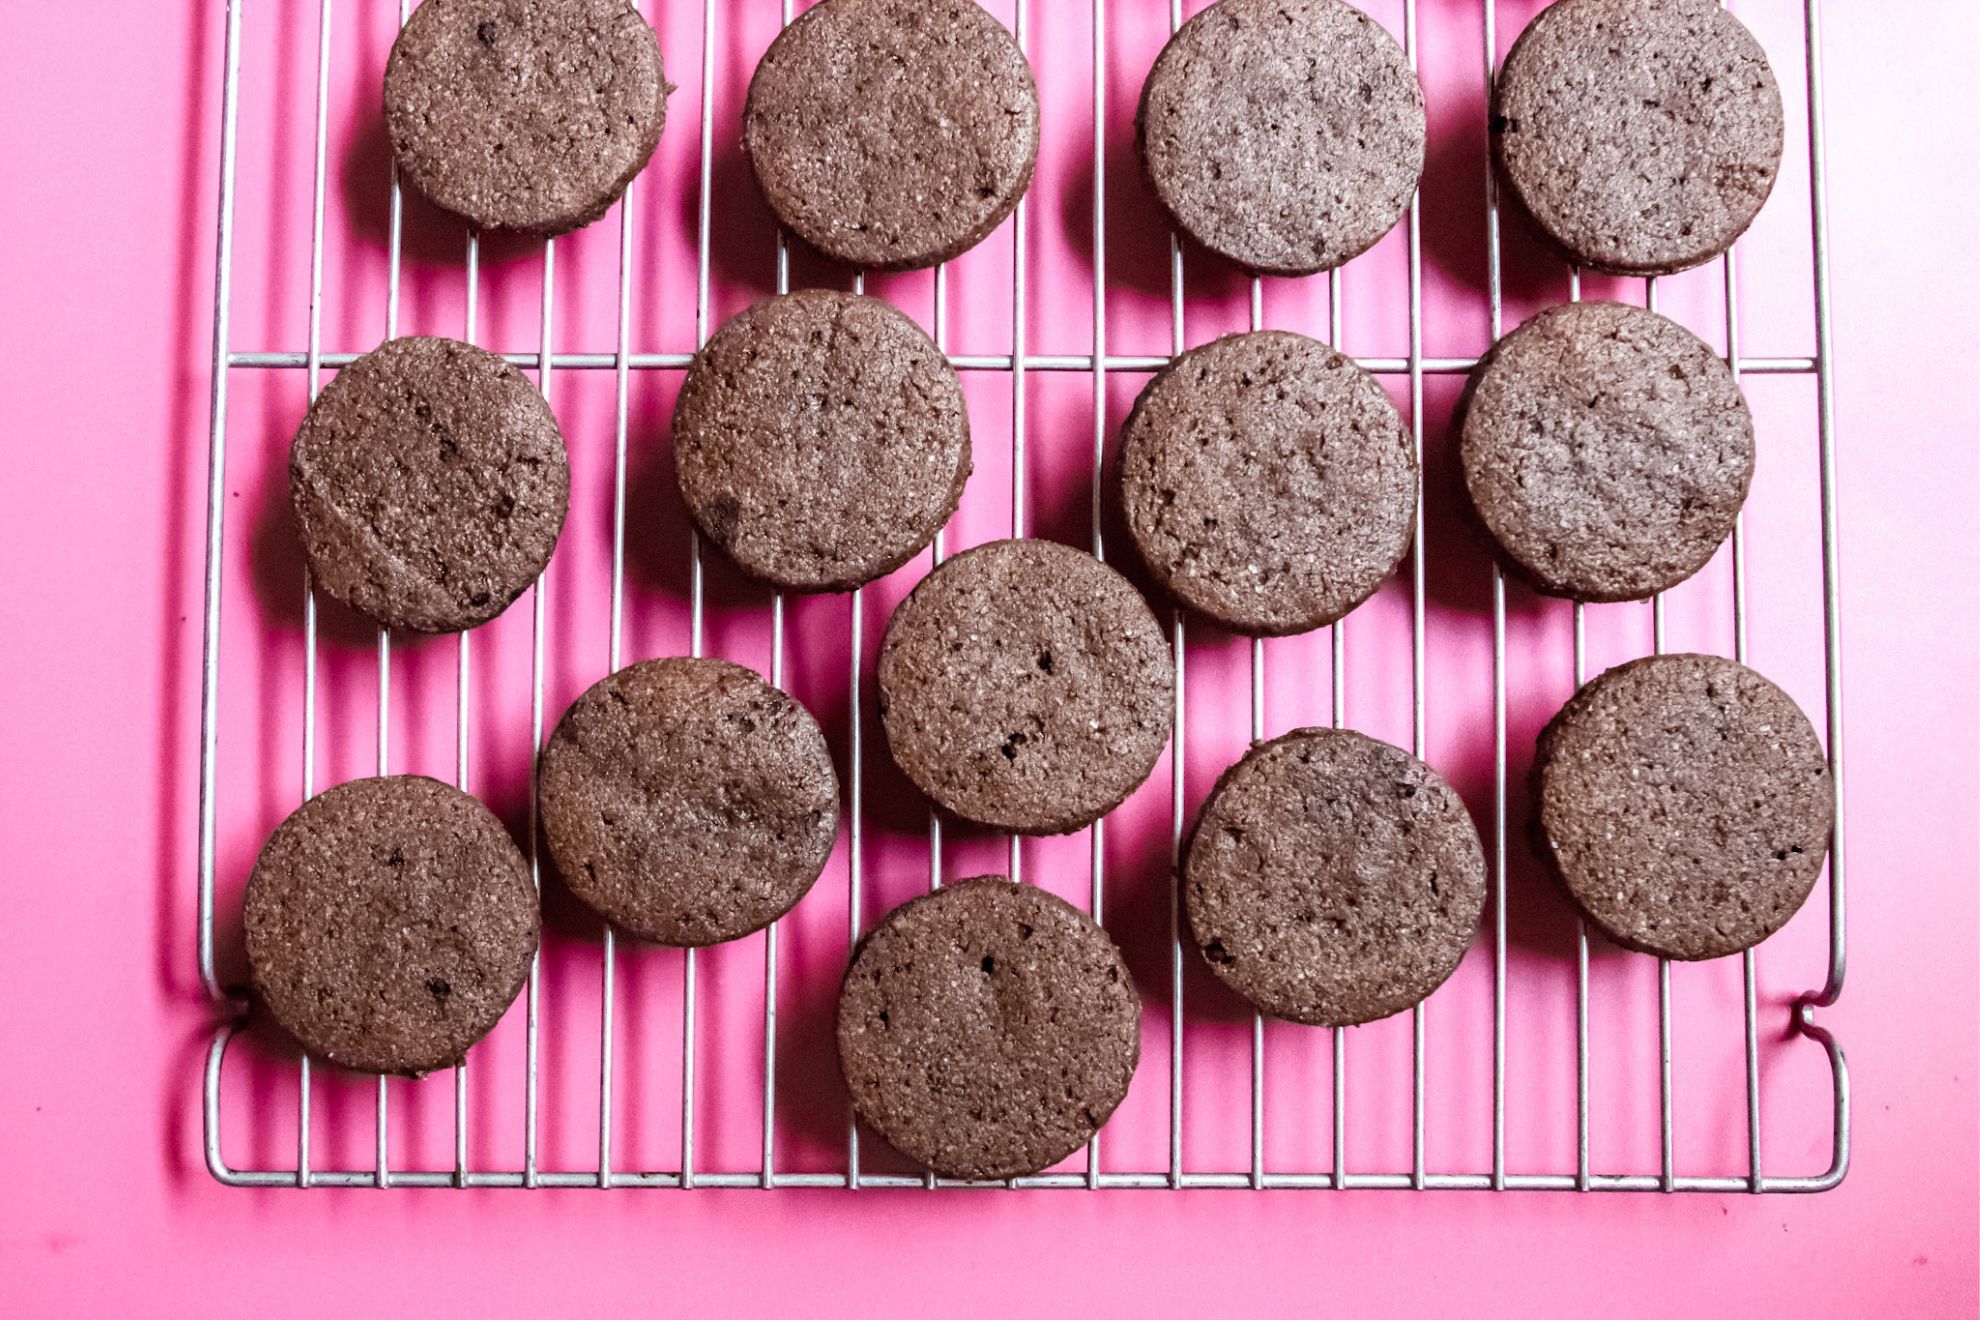 This is an overhead horizontal image of a silver cooling rack on a dark pink surface. On the cooling rack are chocolate circle cookies.